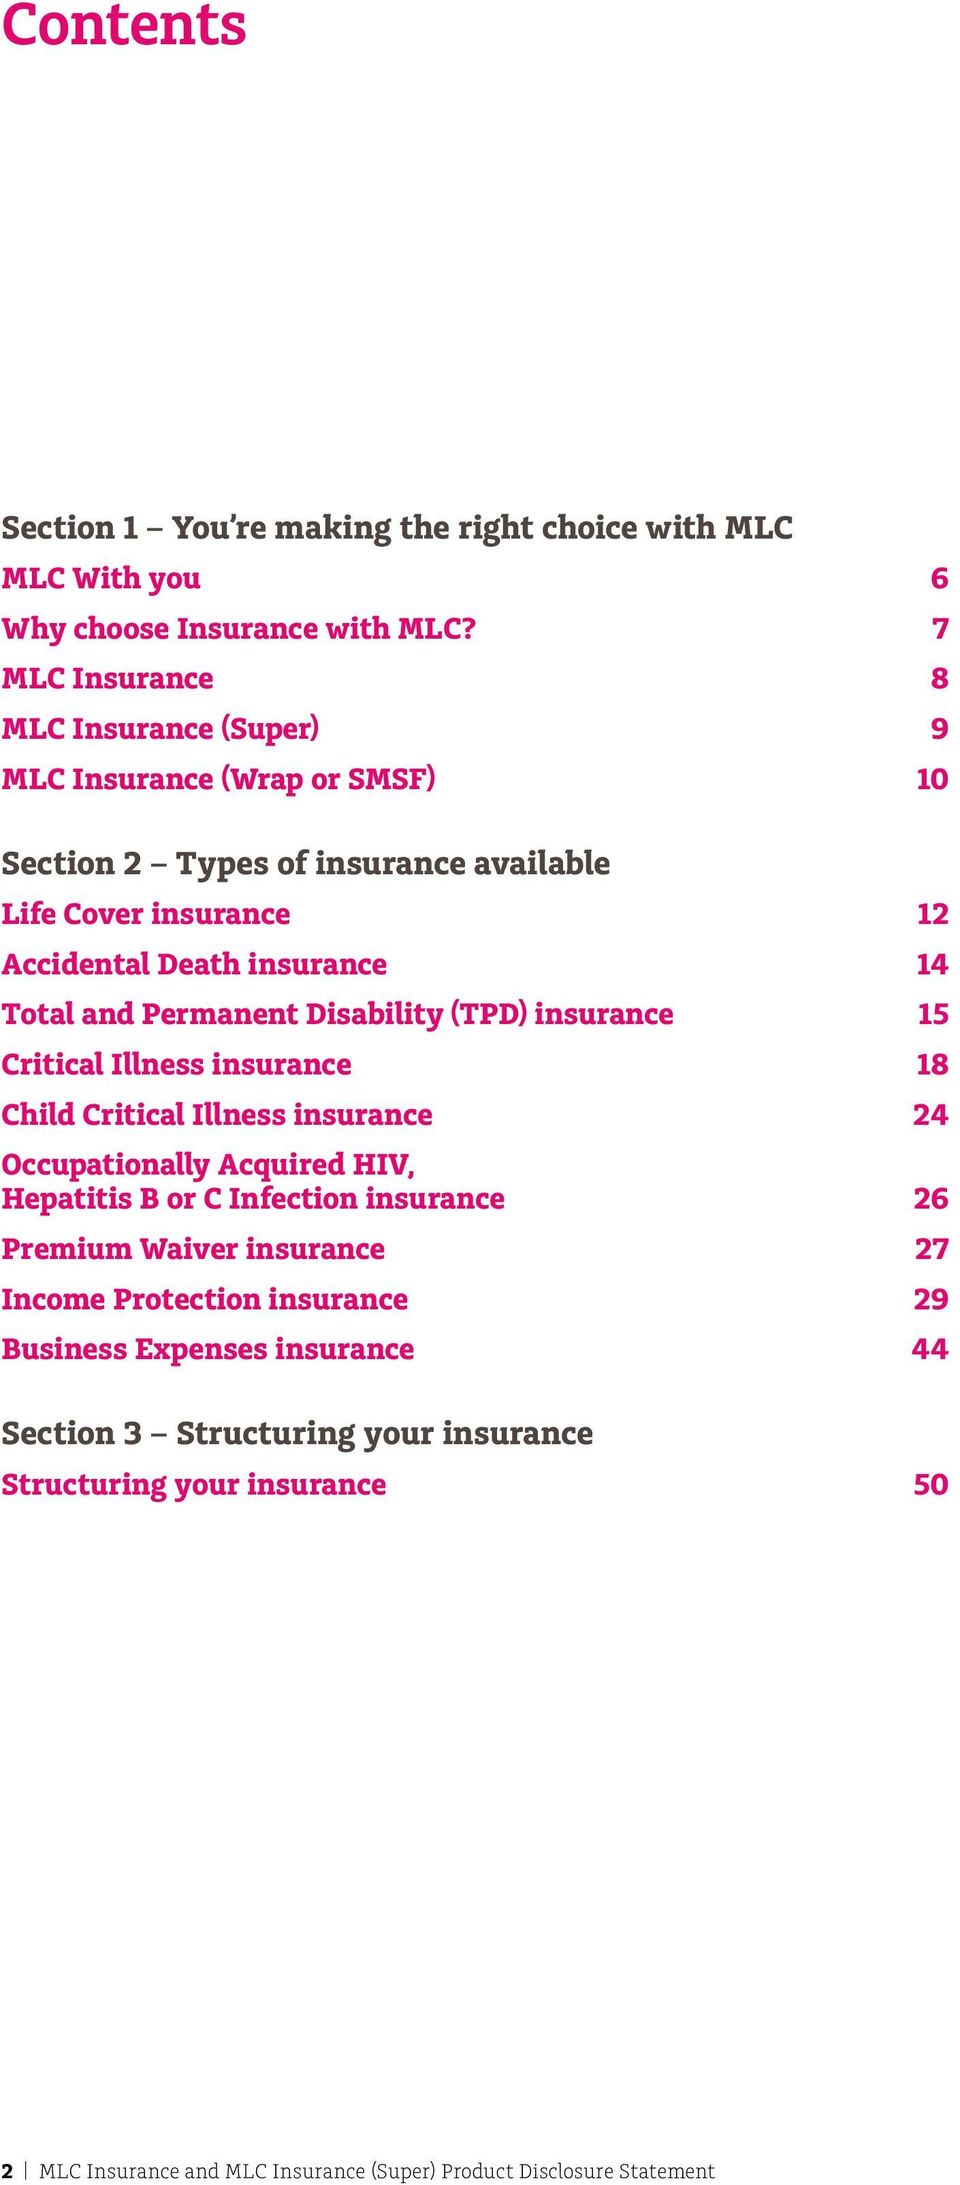 Total and Permanent Disability (TPD) insurance 15 Critical Illness insurance 18 Child Critical Illness insurance 24 Occupationally Acquired HIV, Hepatitis B or C